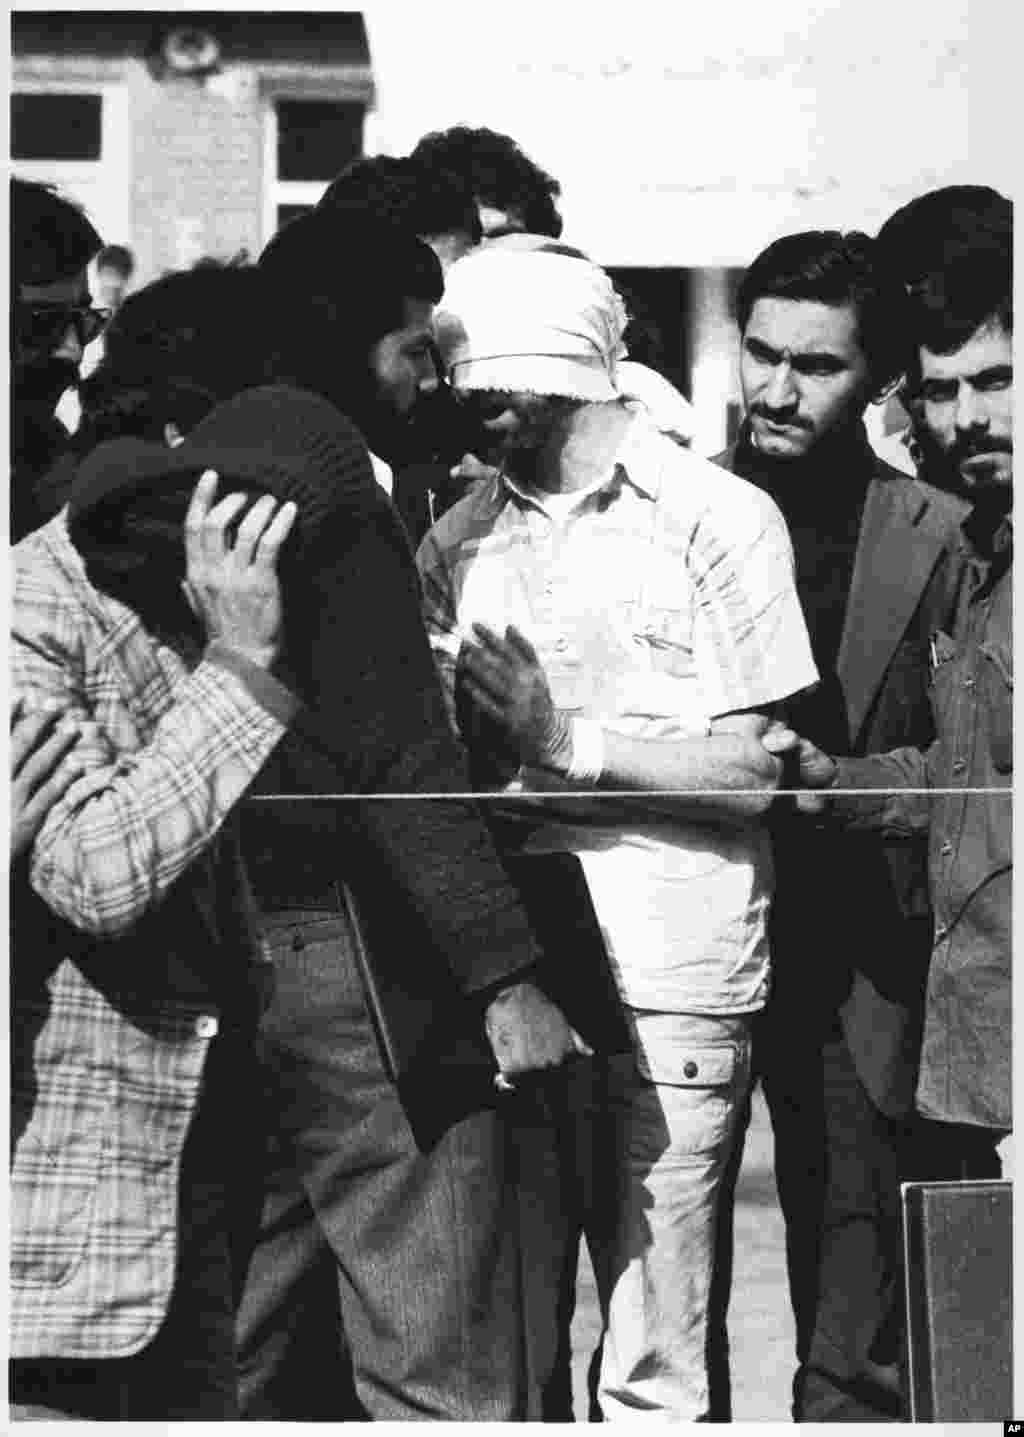 One of 60 U.S. hostages, blindfolded and with his hands bound, is being displayed to the crowd outside the U.S. Embassy in Tehran by Iranian hostage takers. The hostage crisis overshadowed all other events of the Carter presidency.